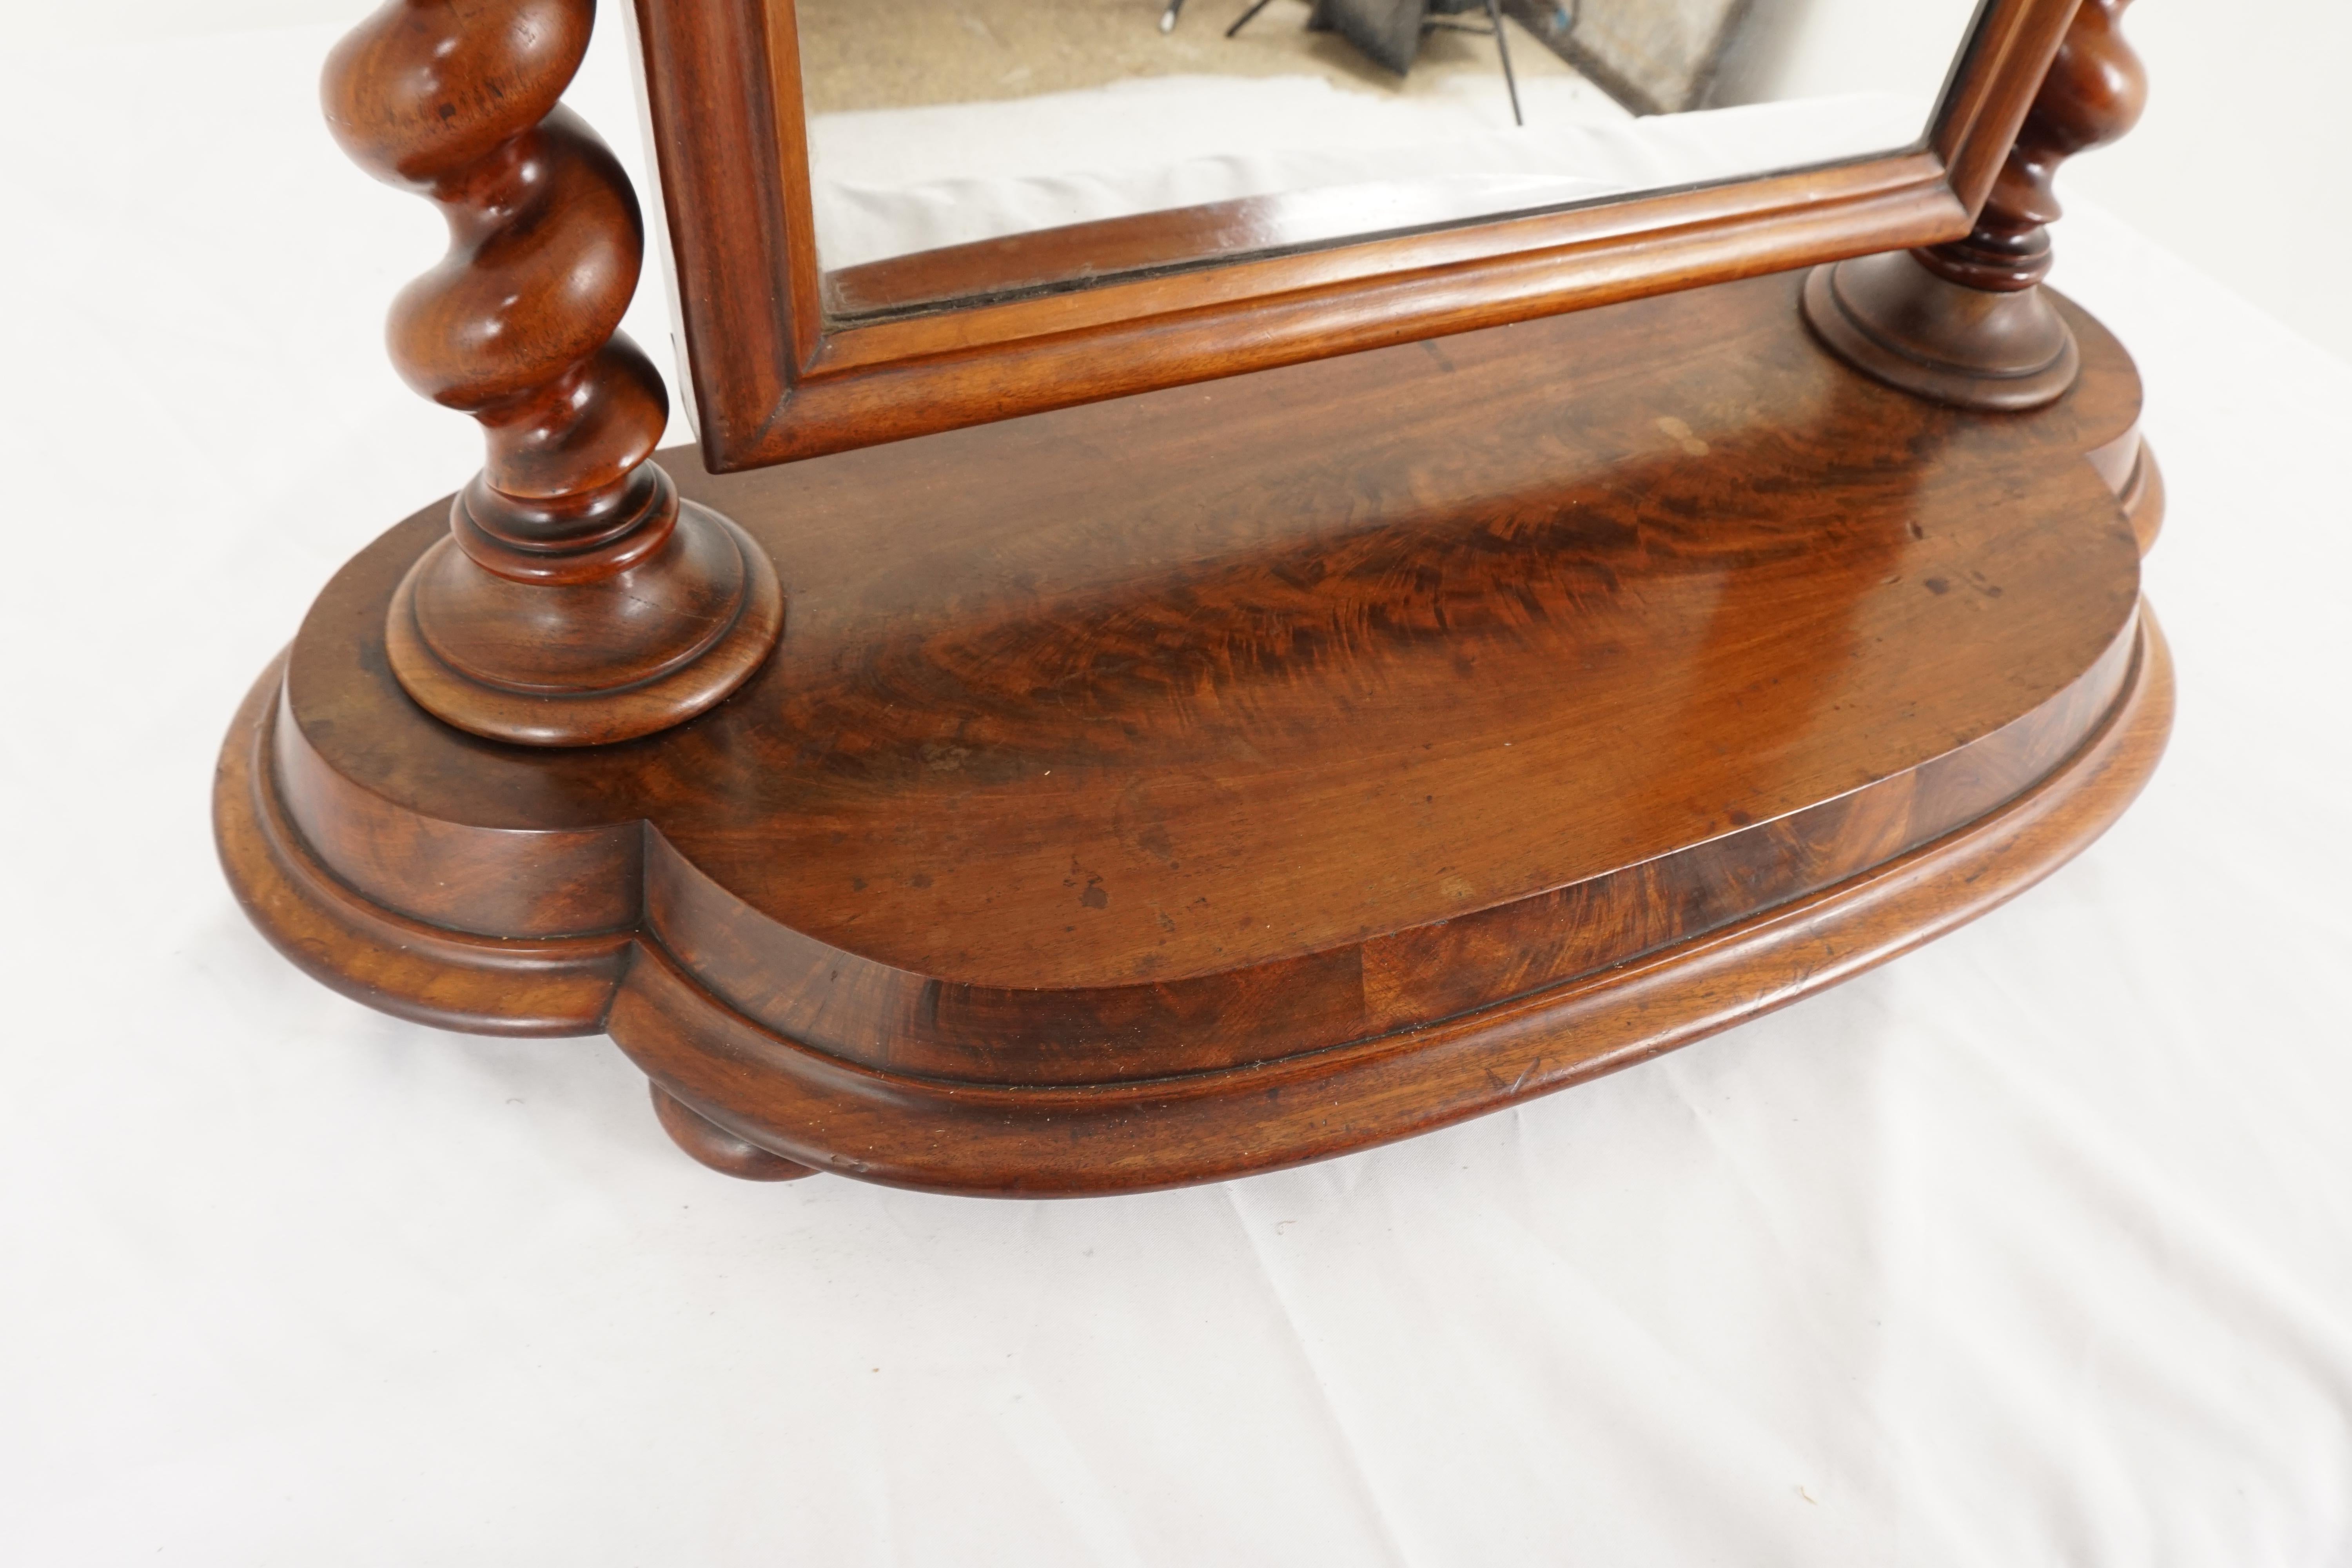 Antique Victorian barley twist Walnut dressing table or vanity mirror Scotland 1880, H144

Scotland 1880
Solid Walnut 
Original Finish
Large framed original mirror with light foxing
Supported by large barley twist risers with turned finials to the